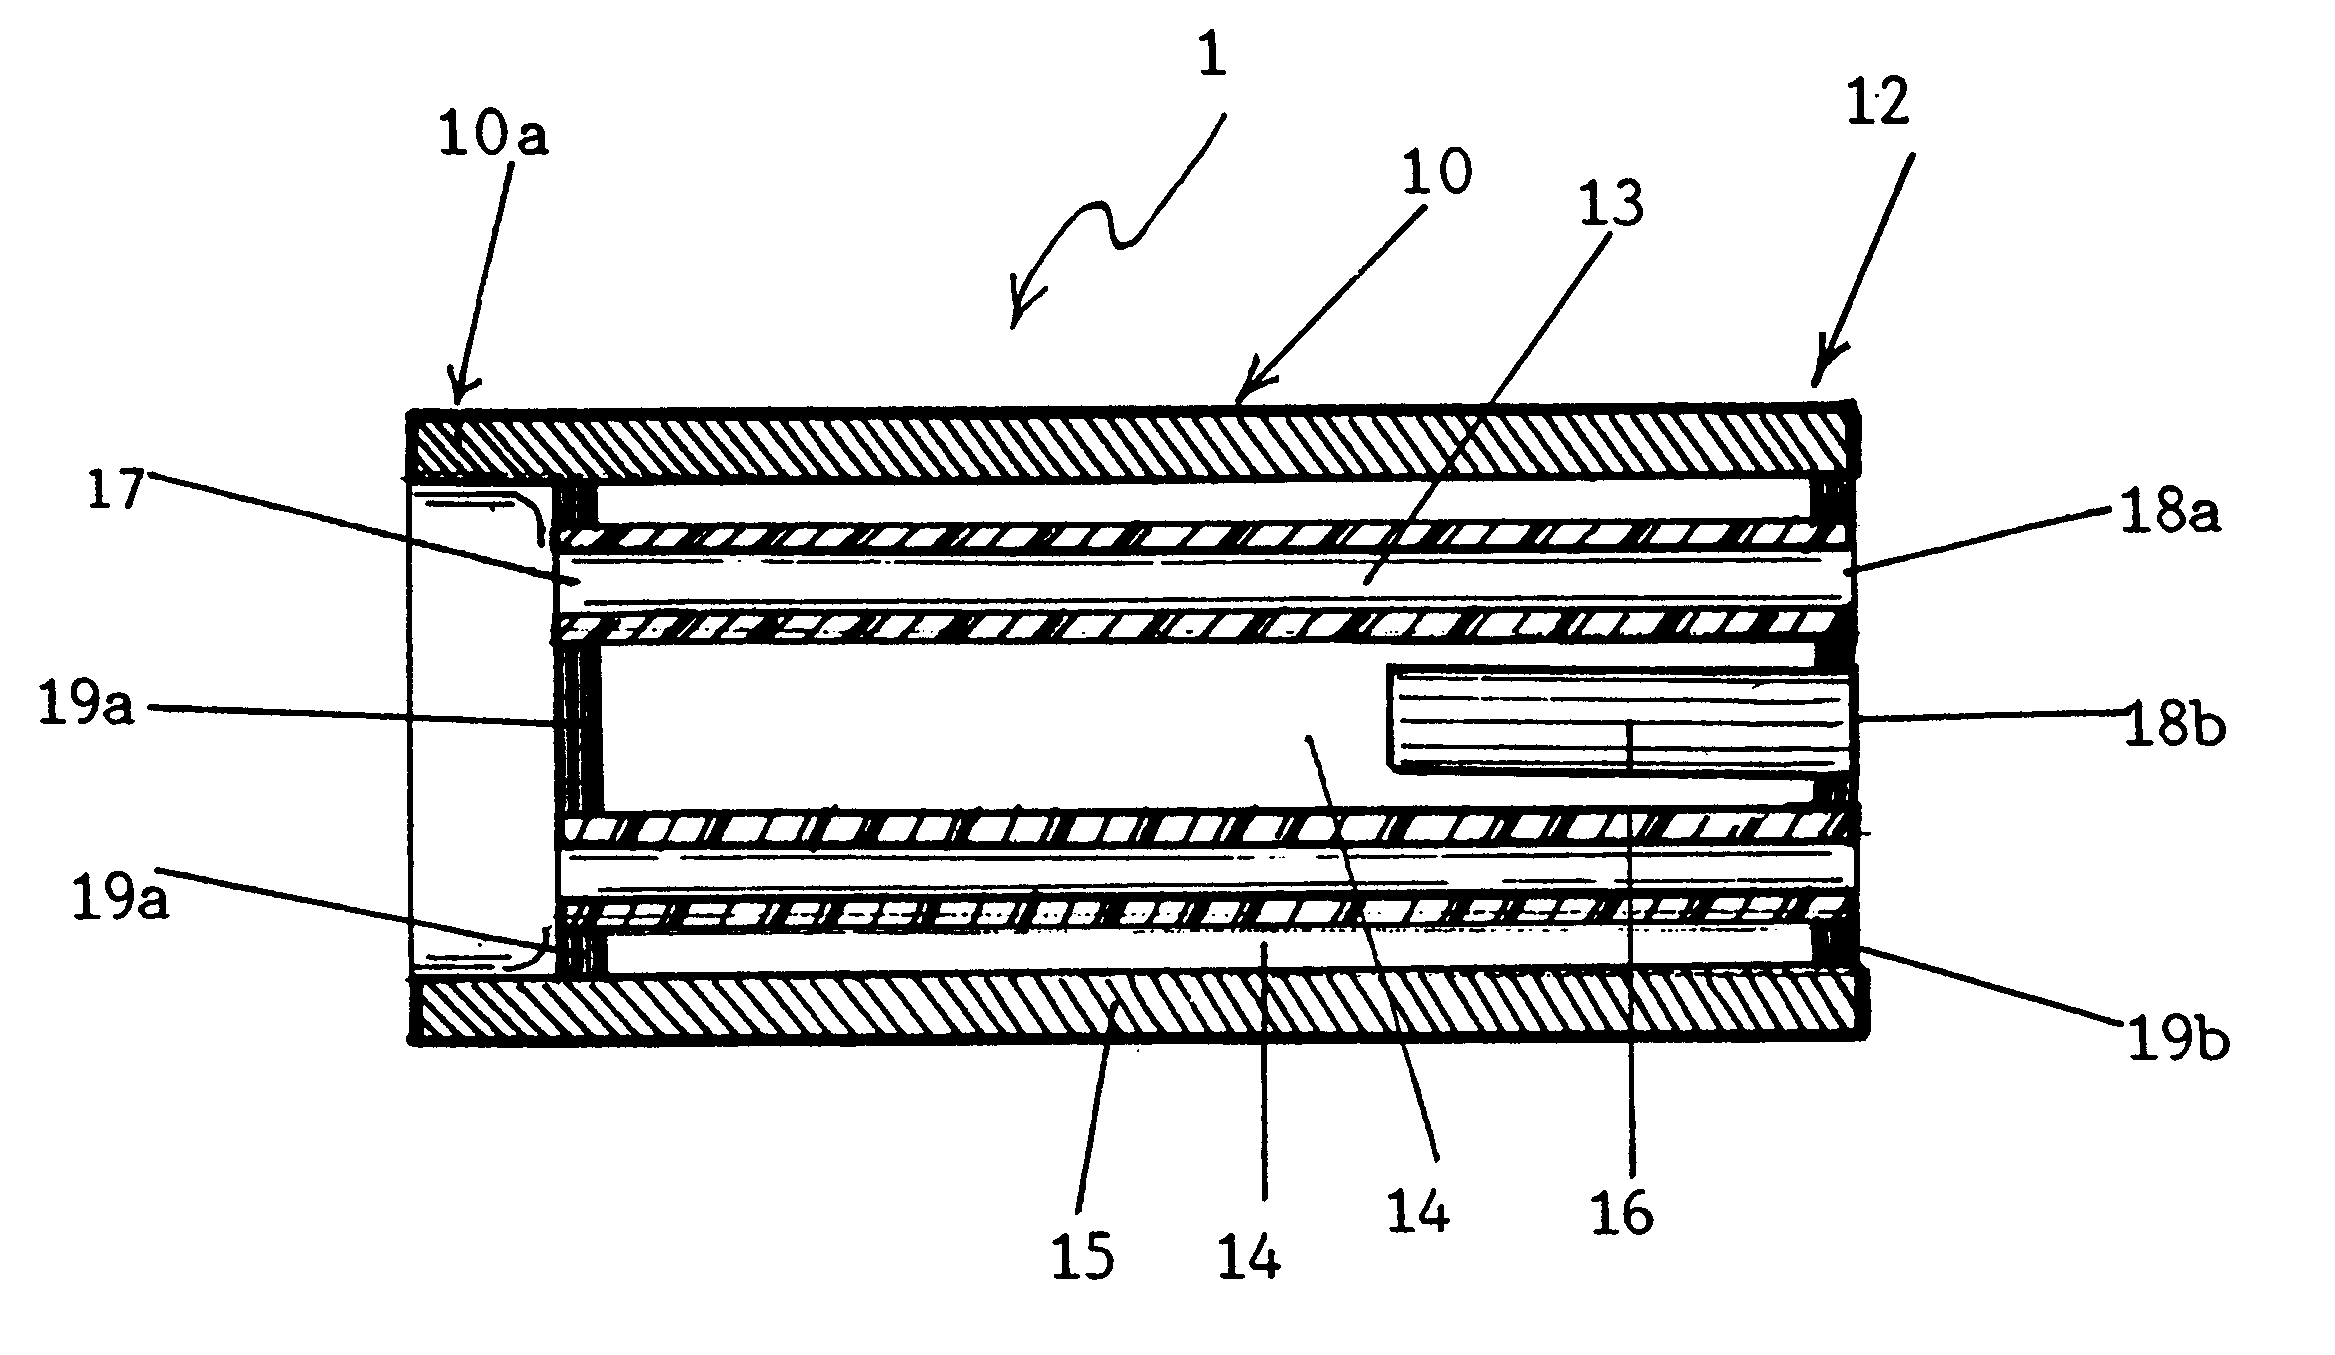 Filter for secondary smoke and smoking articles incorporating the same